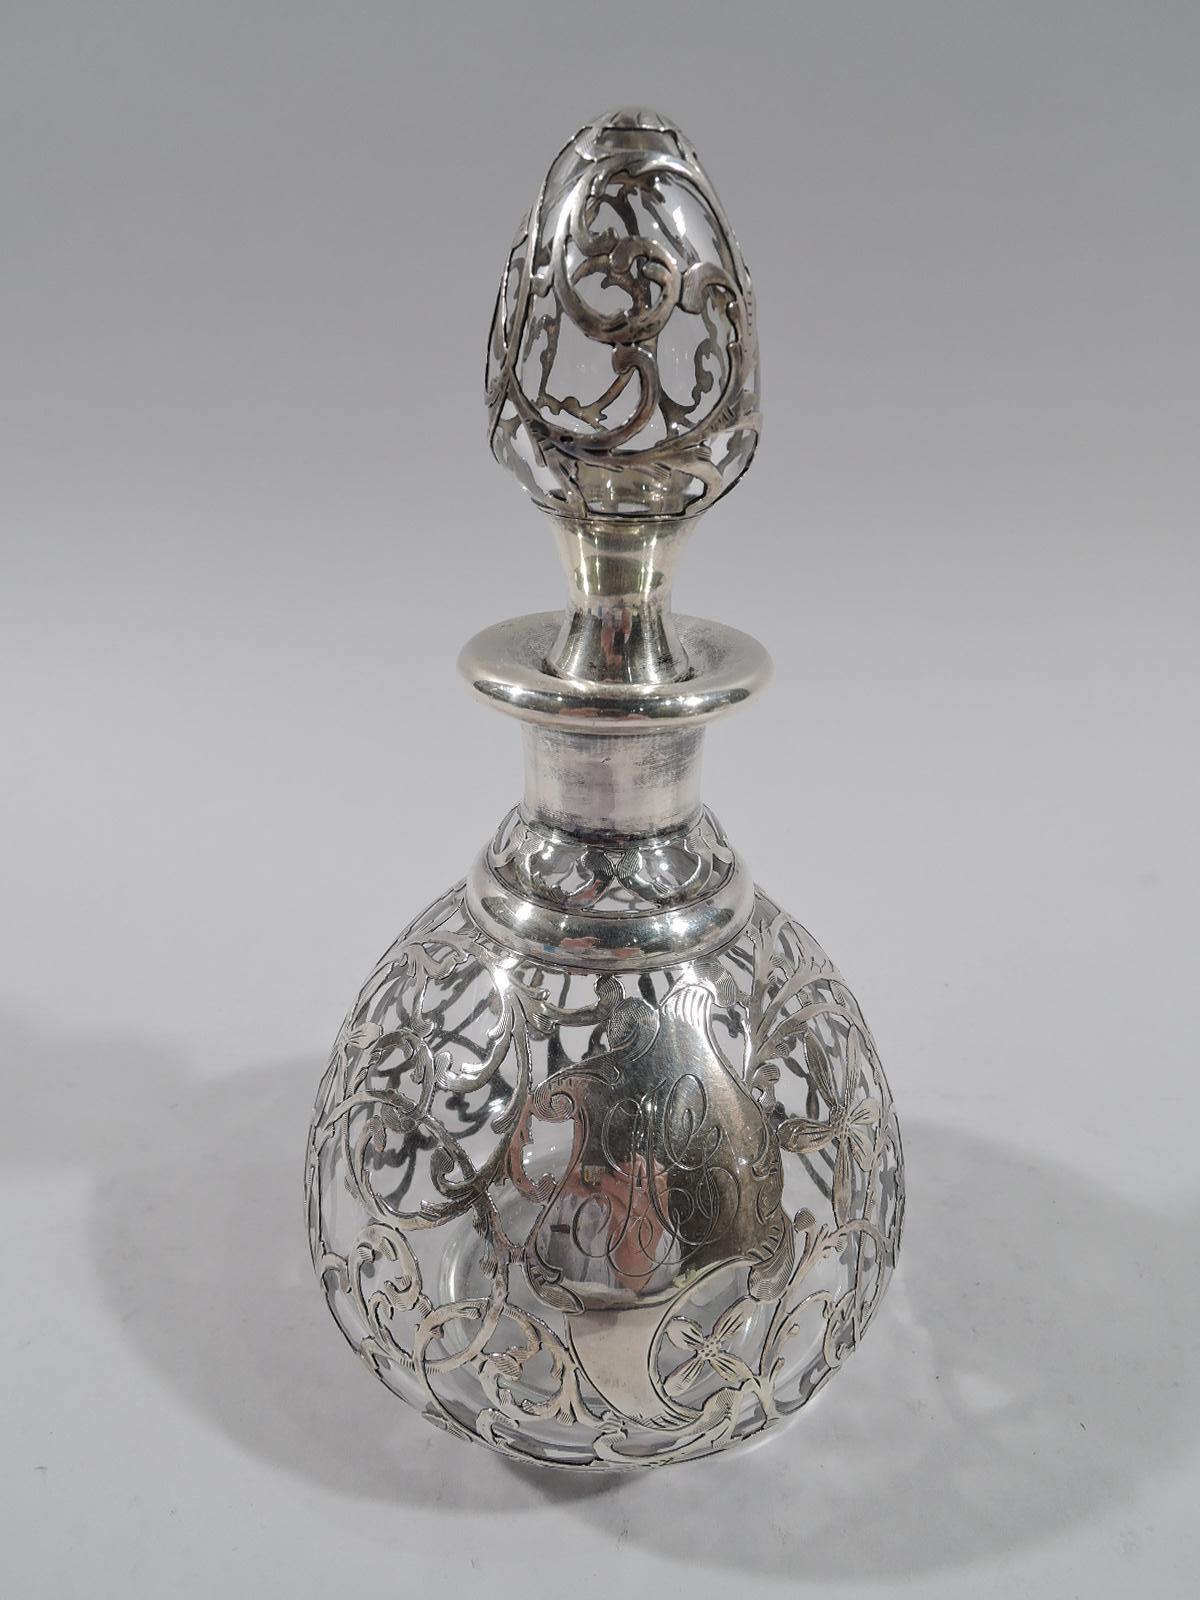 Turn-of-the-century American Art Nouveau glass perfume with engraved silver overlay. Ovoid bottle with short neck and everted rim in silver collar. Stopper ovoid with concave neck in same. Dense overlay in form of entwined and scrolling tendrils,